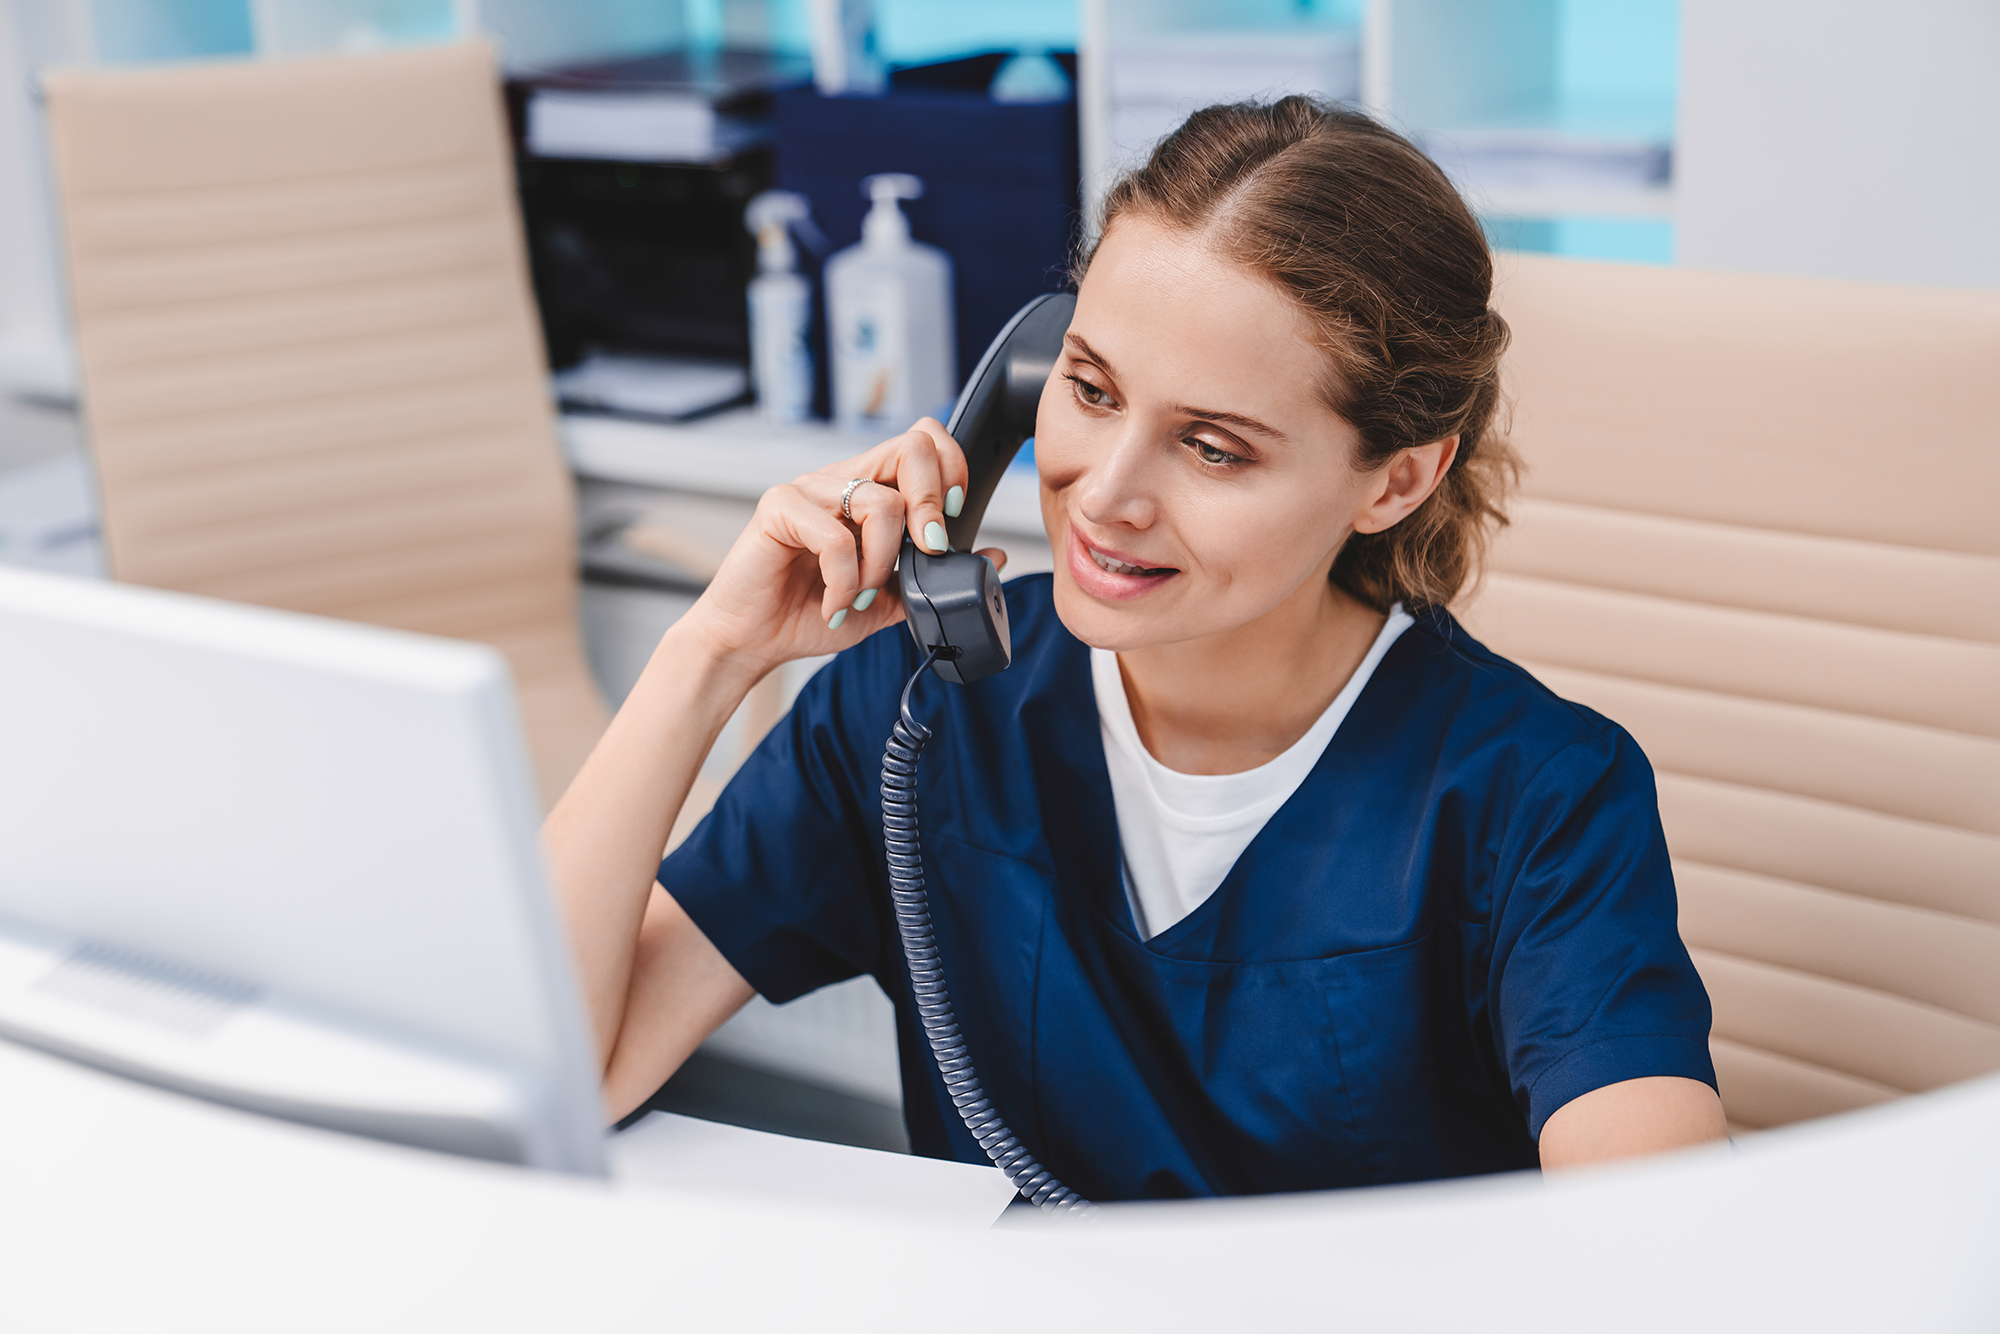 Training Your Front Staff On Phone Etiquette Will Help Close More Dental Implant Cases